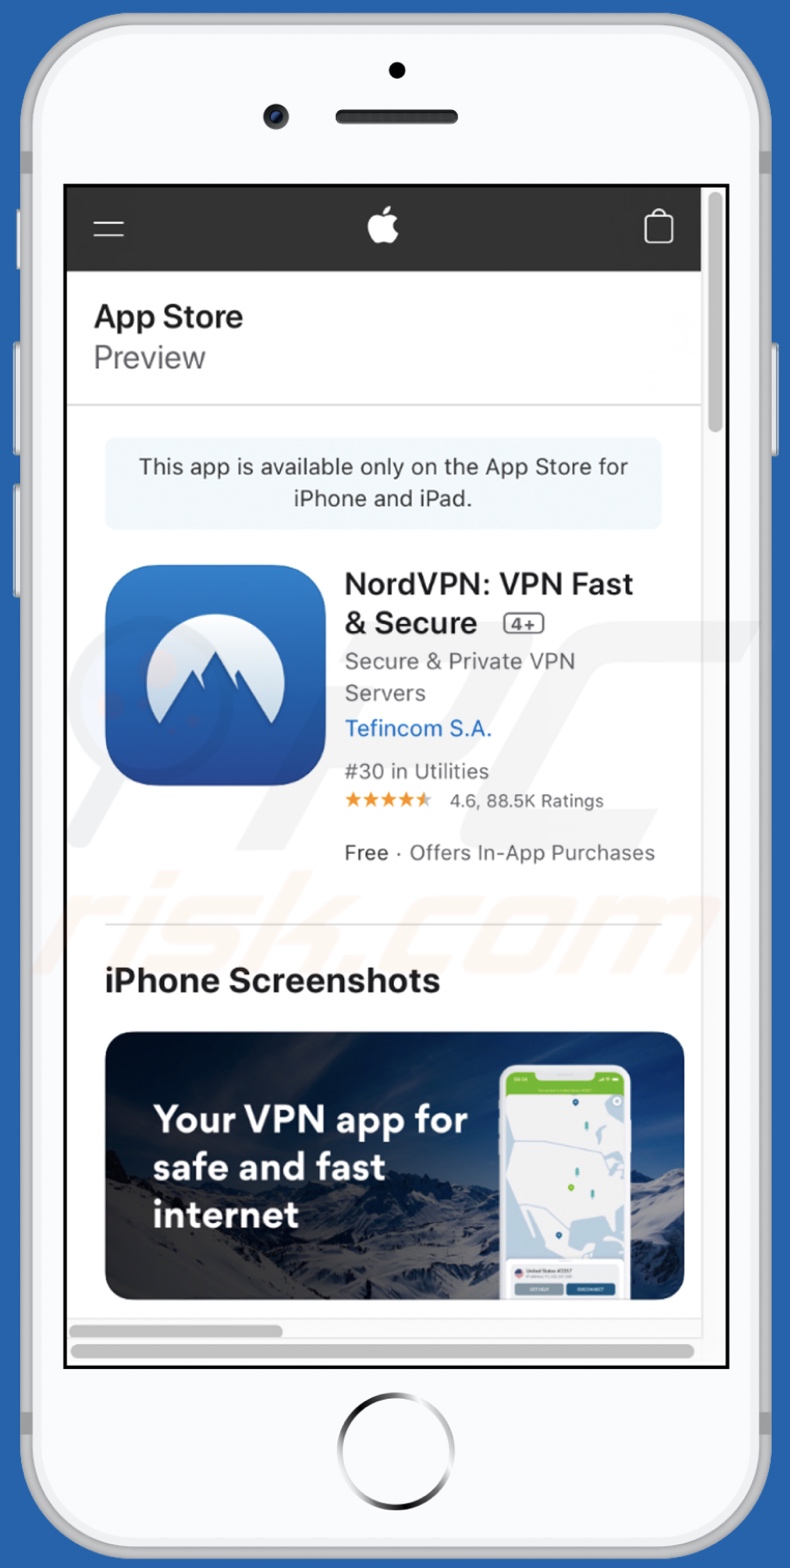 IOS VPN profile scam mobile variant promoted app